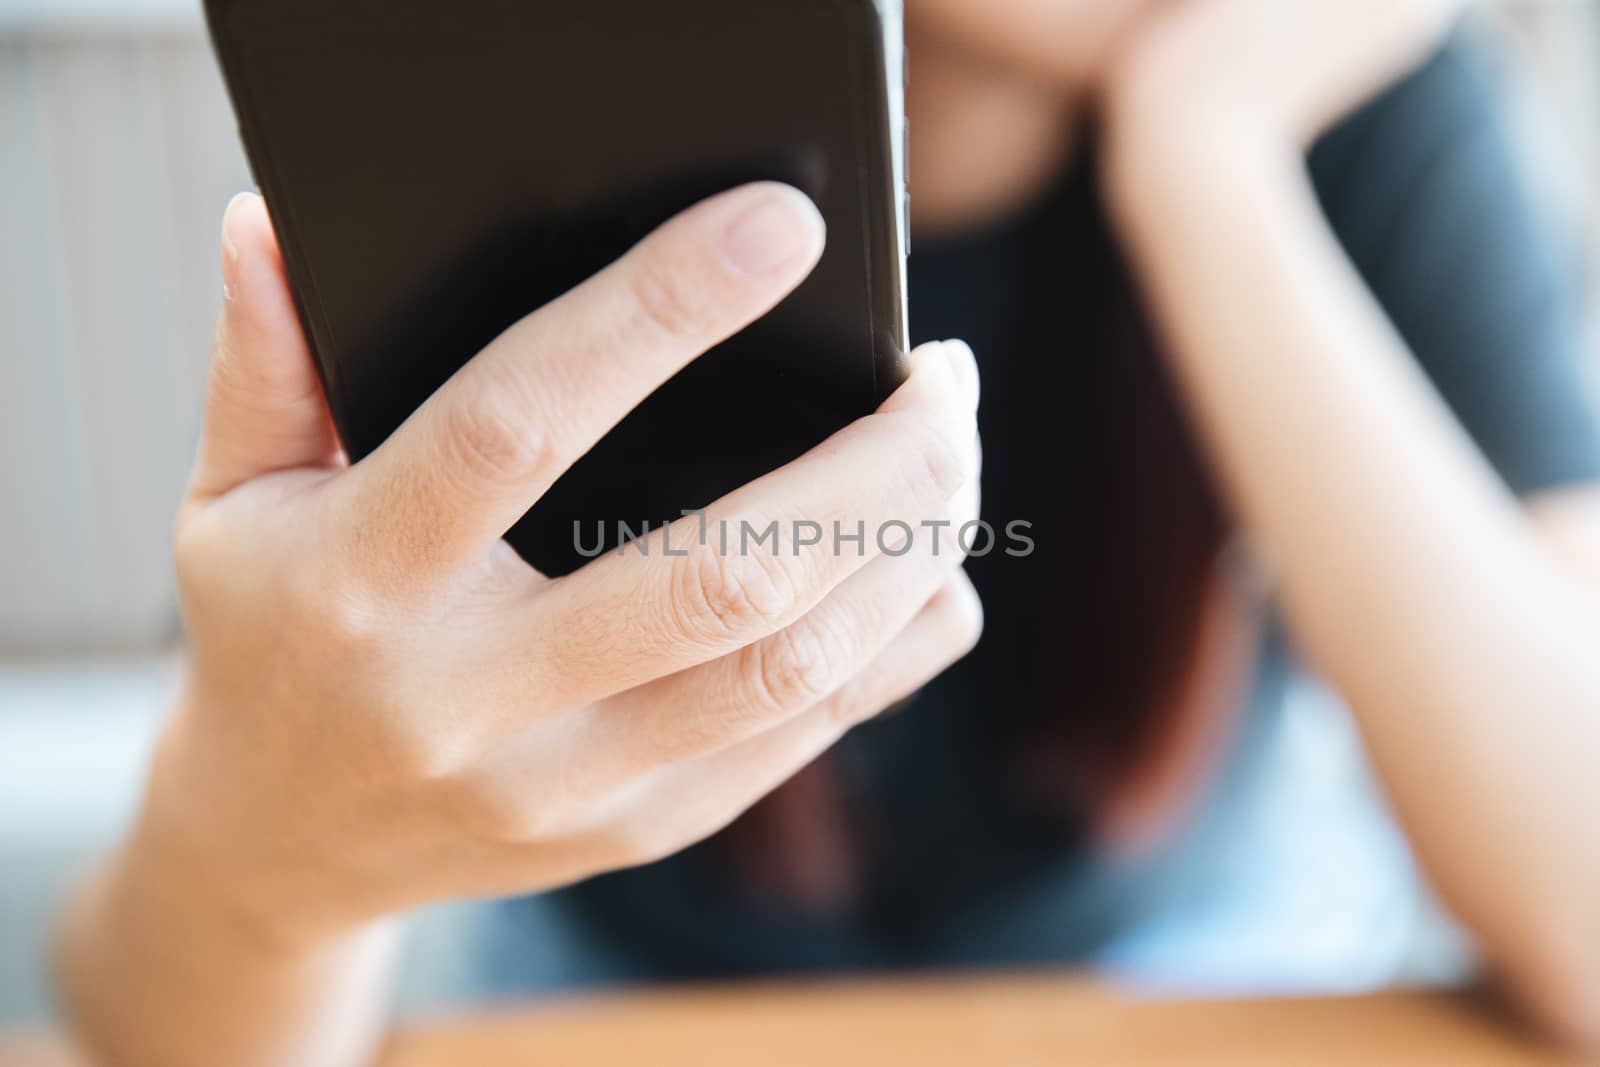 Woman hand using smart phone in business